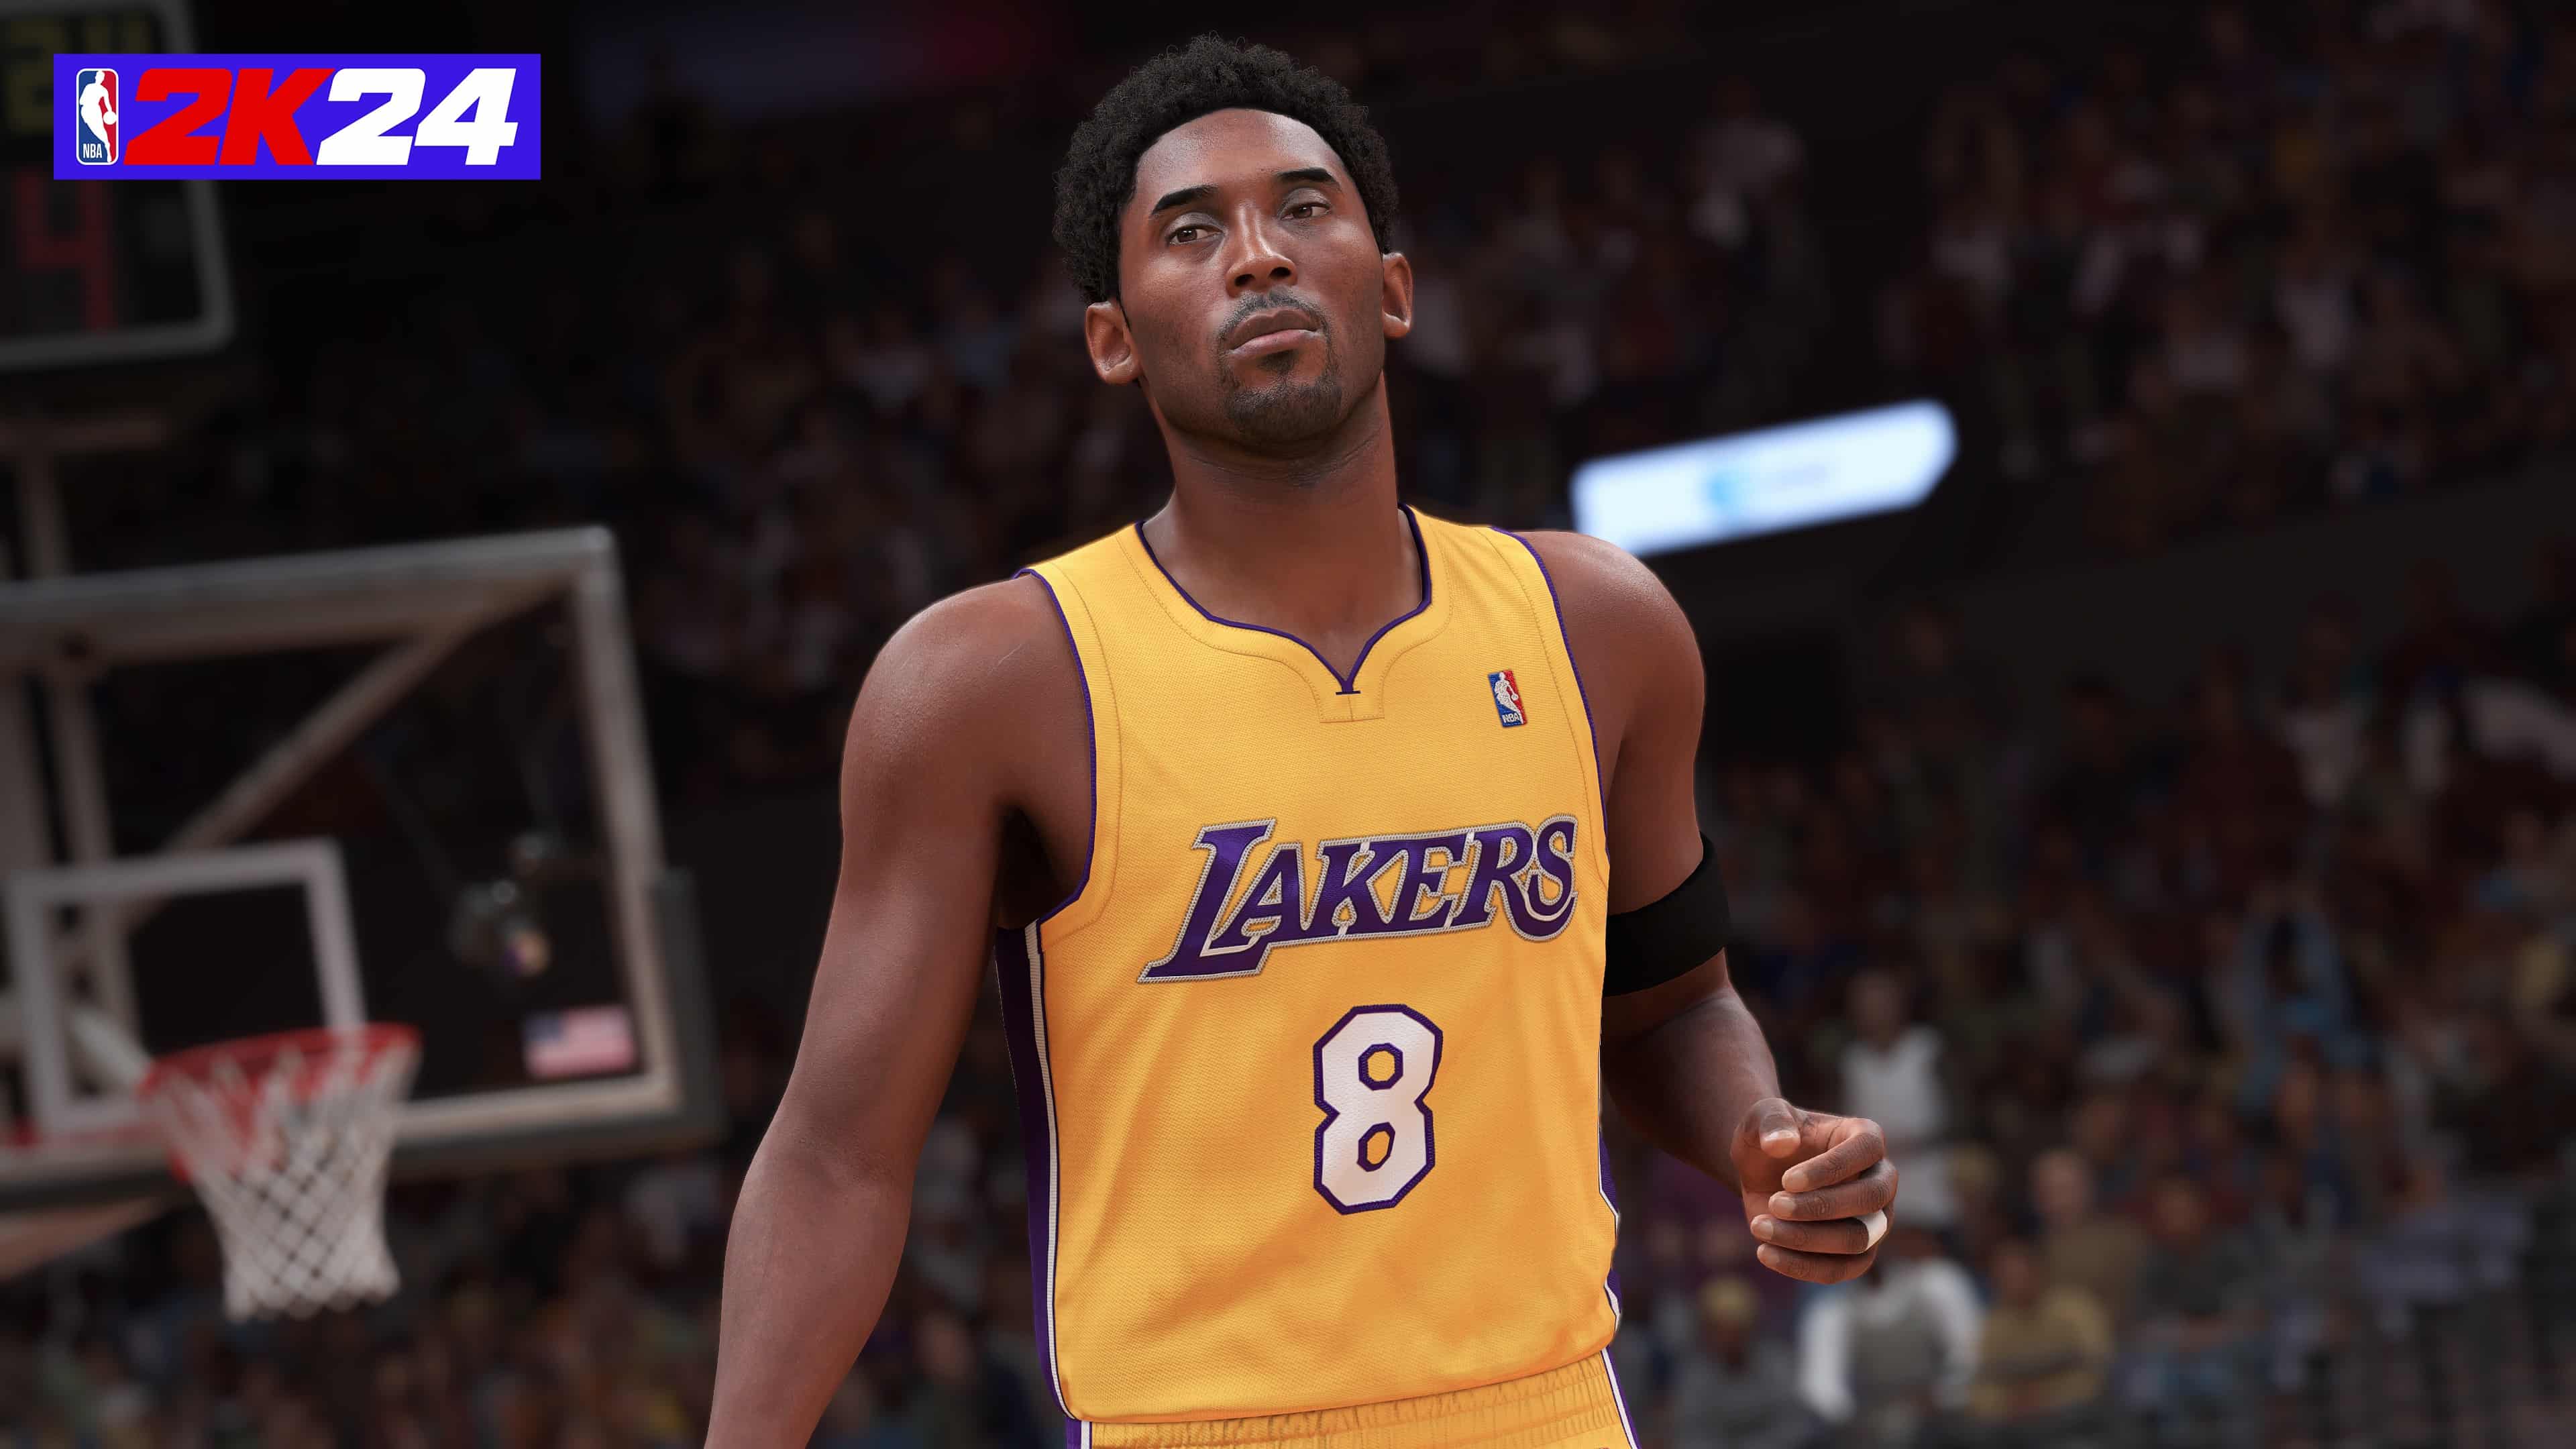 NBA 2K23 Guides – Introduce NBA 2k23 related news and guides, as